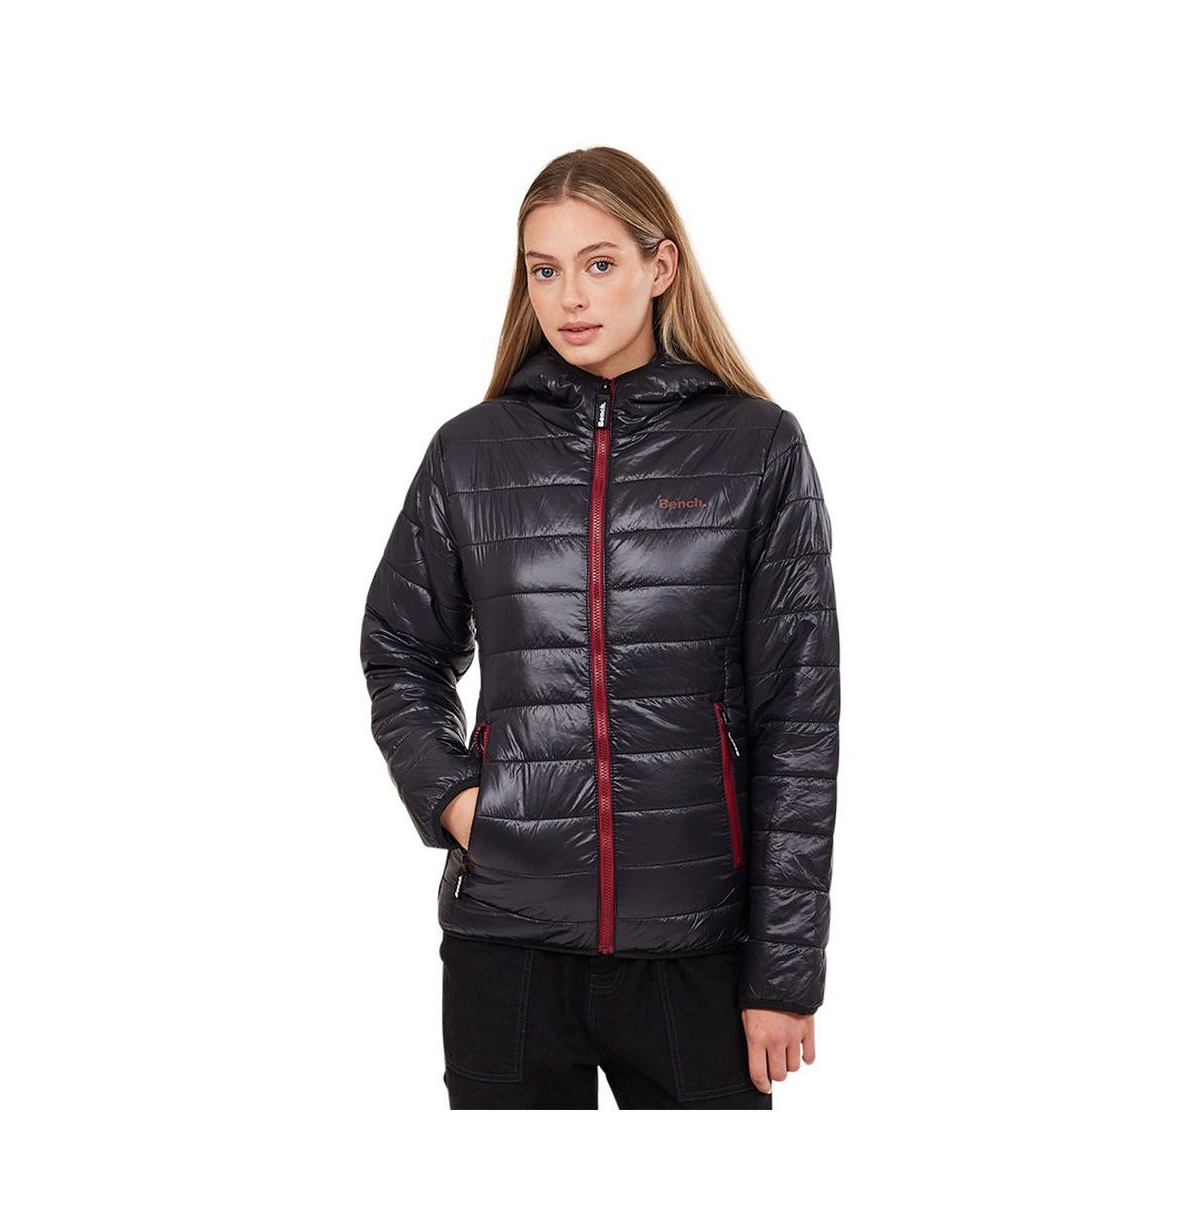 BENCH KARA WOMENS JACKET QUILTED BLACK WITH RED ZIPPER